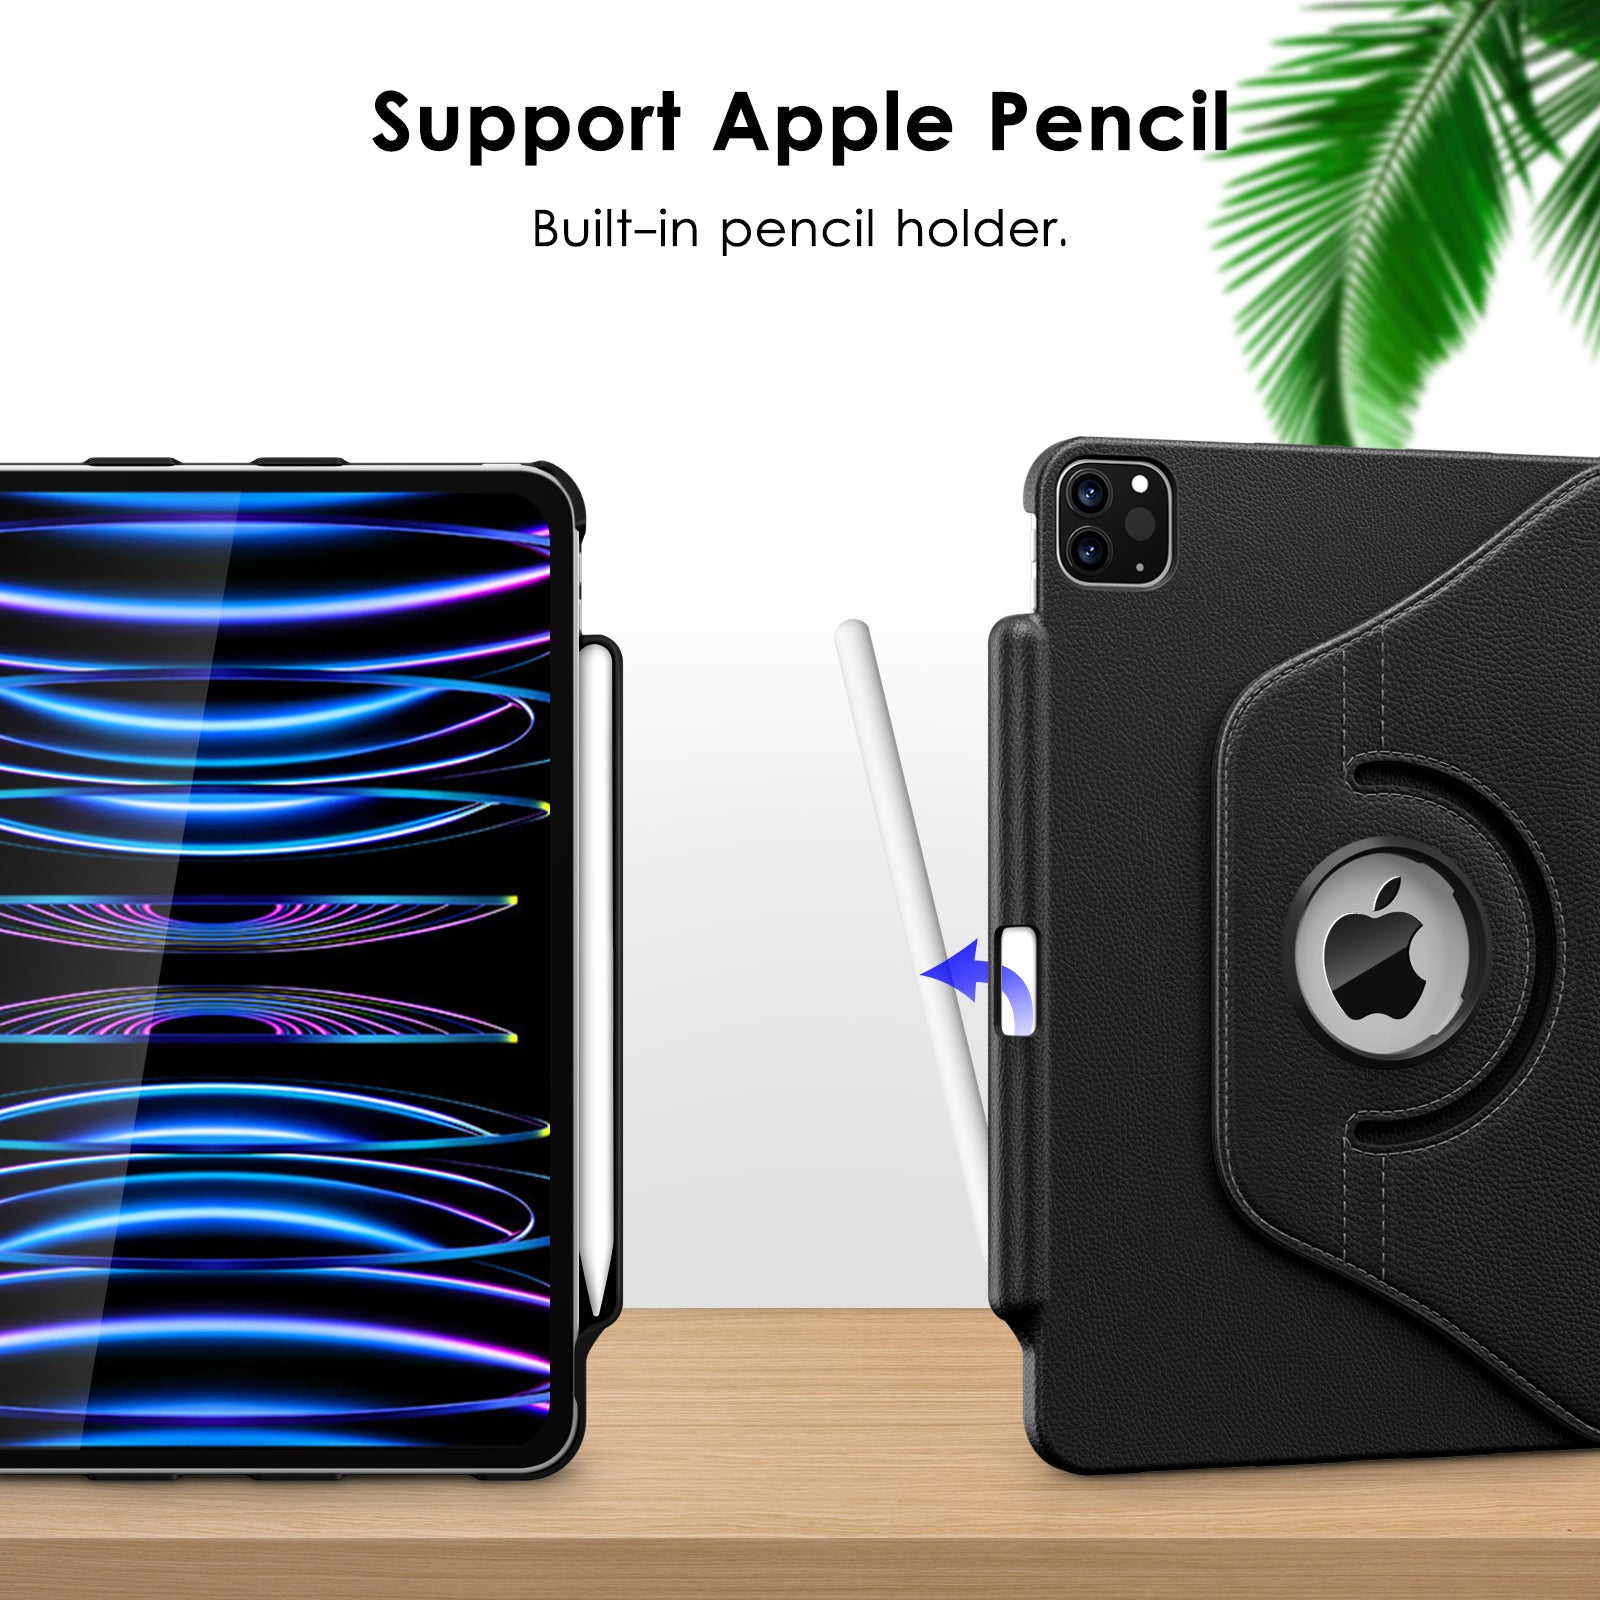 Rotating Case for iPad Pro 11 Inch 4th/3rd/2nd/1st Generation 2022/2021/2020/2018,iPad Air Case 5th/4th Generation 10.9 Inch (2022/2020),Smart Leather Cover,Pencil Holder,360°Rotating Stand - Brown